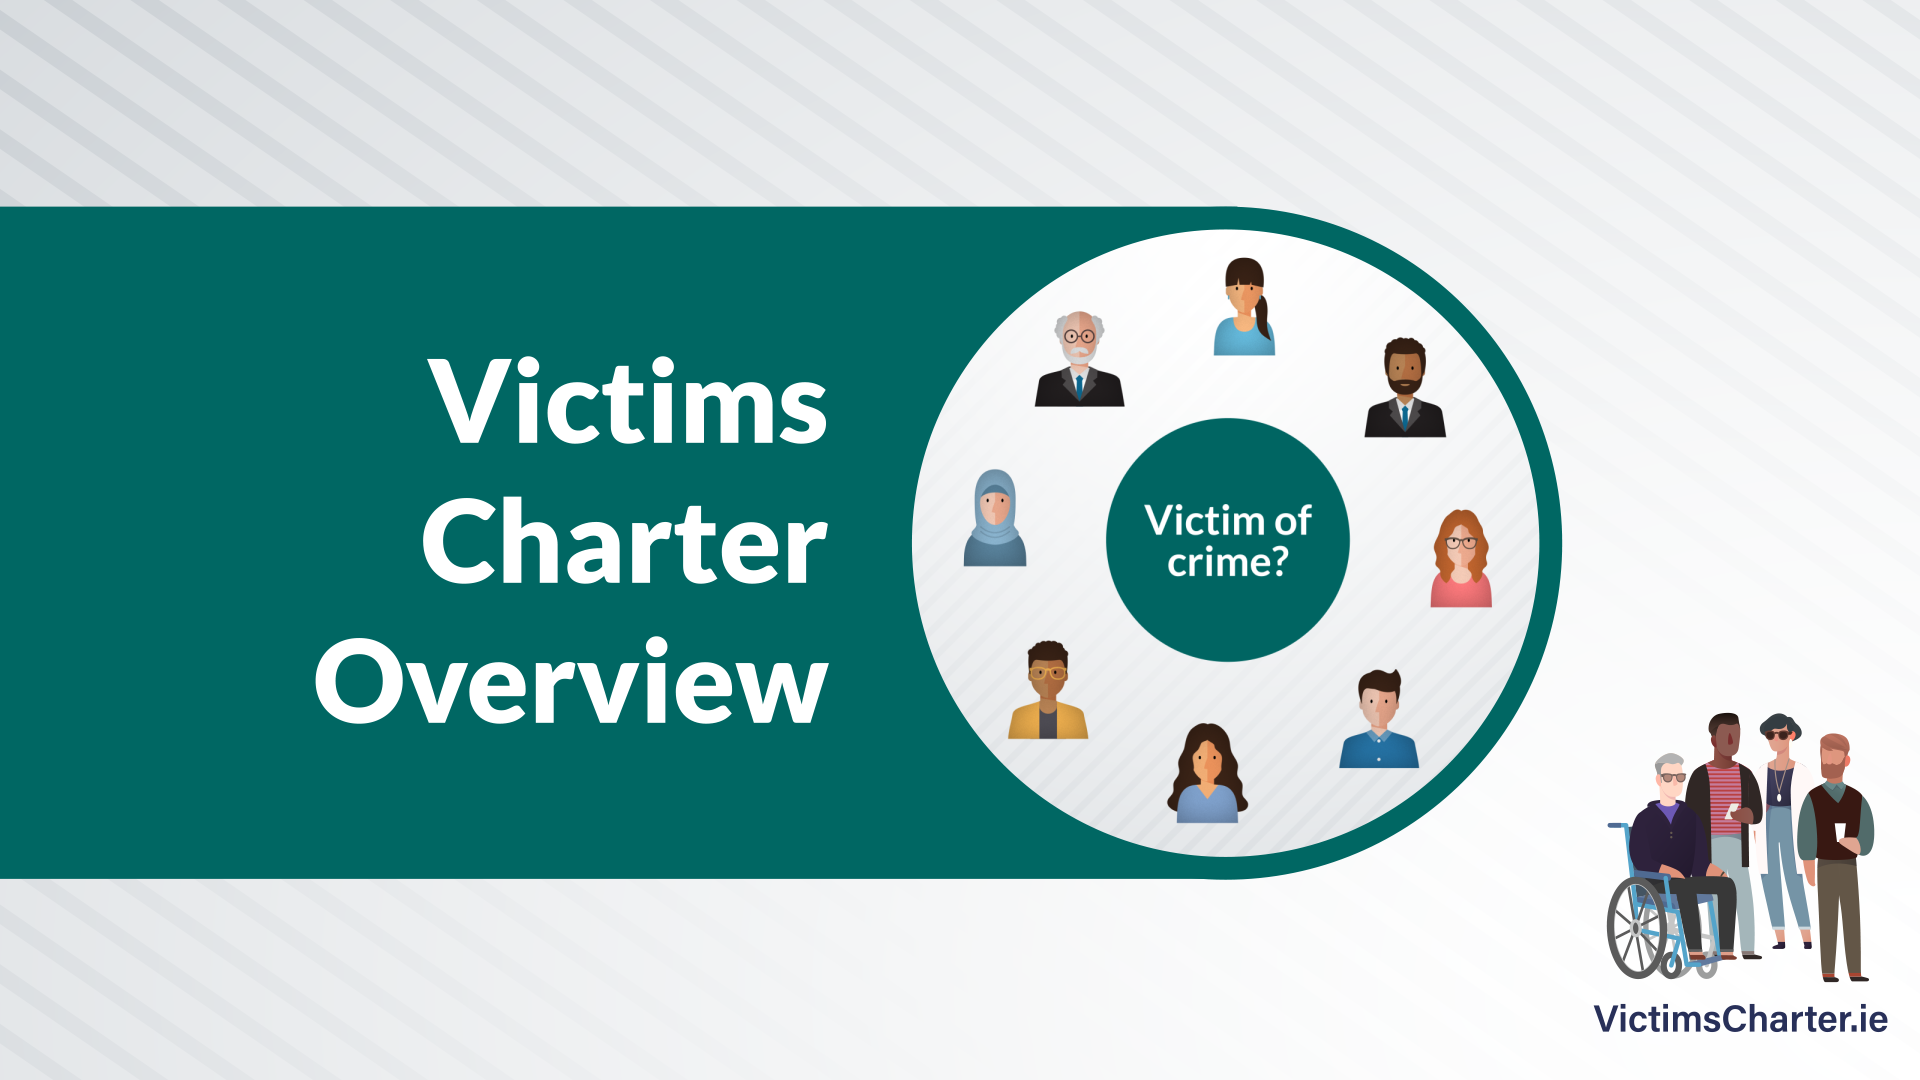 To access video hosted on youtube for an overview of the Victims Charter please click here